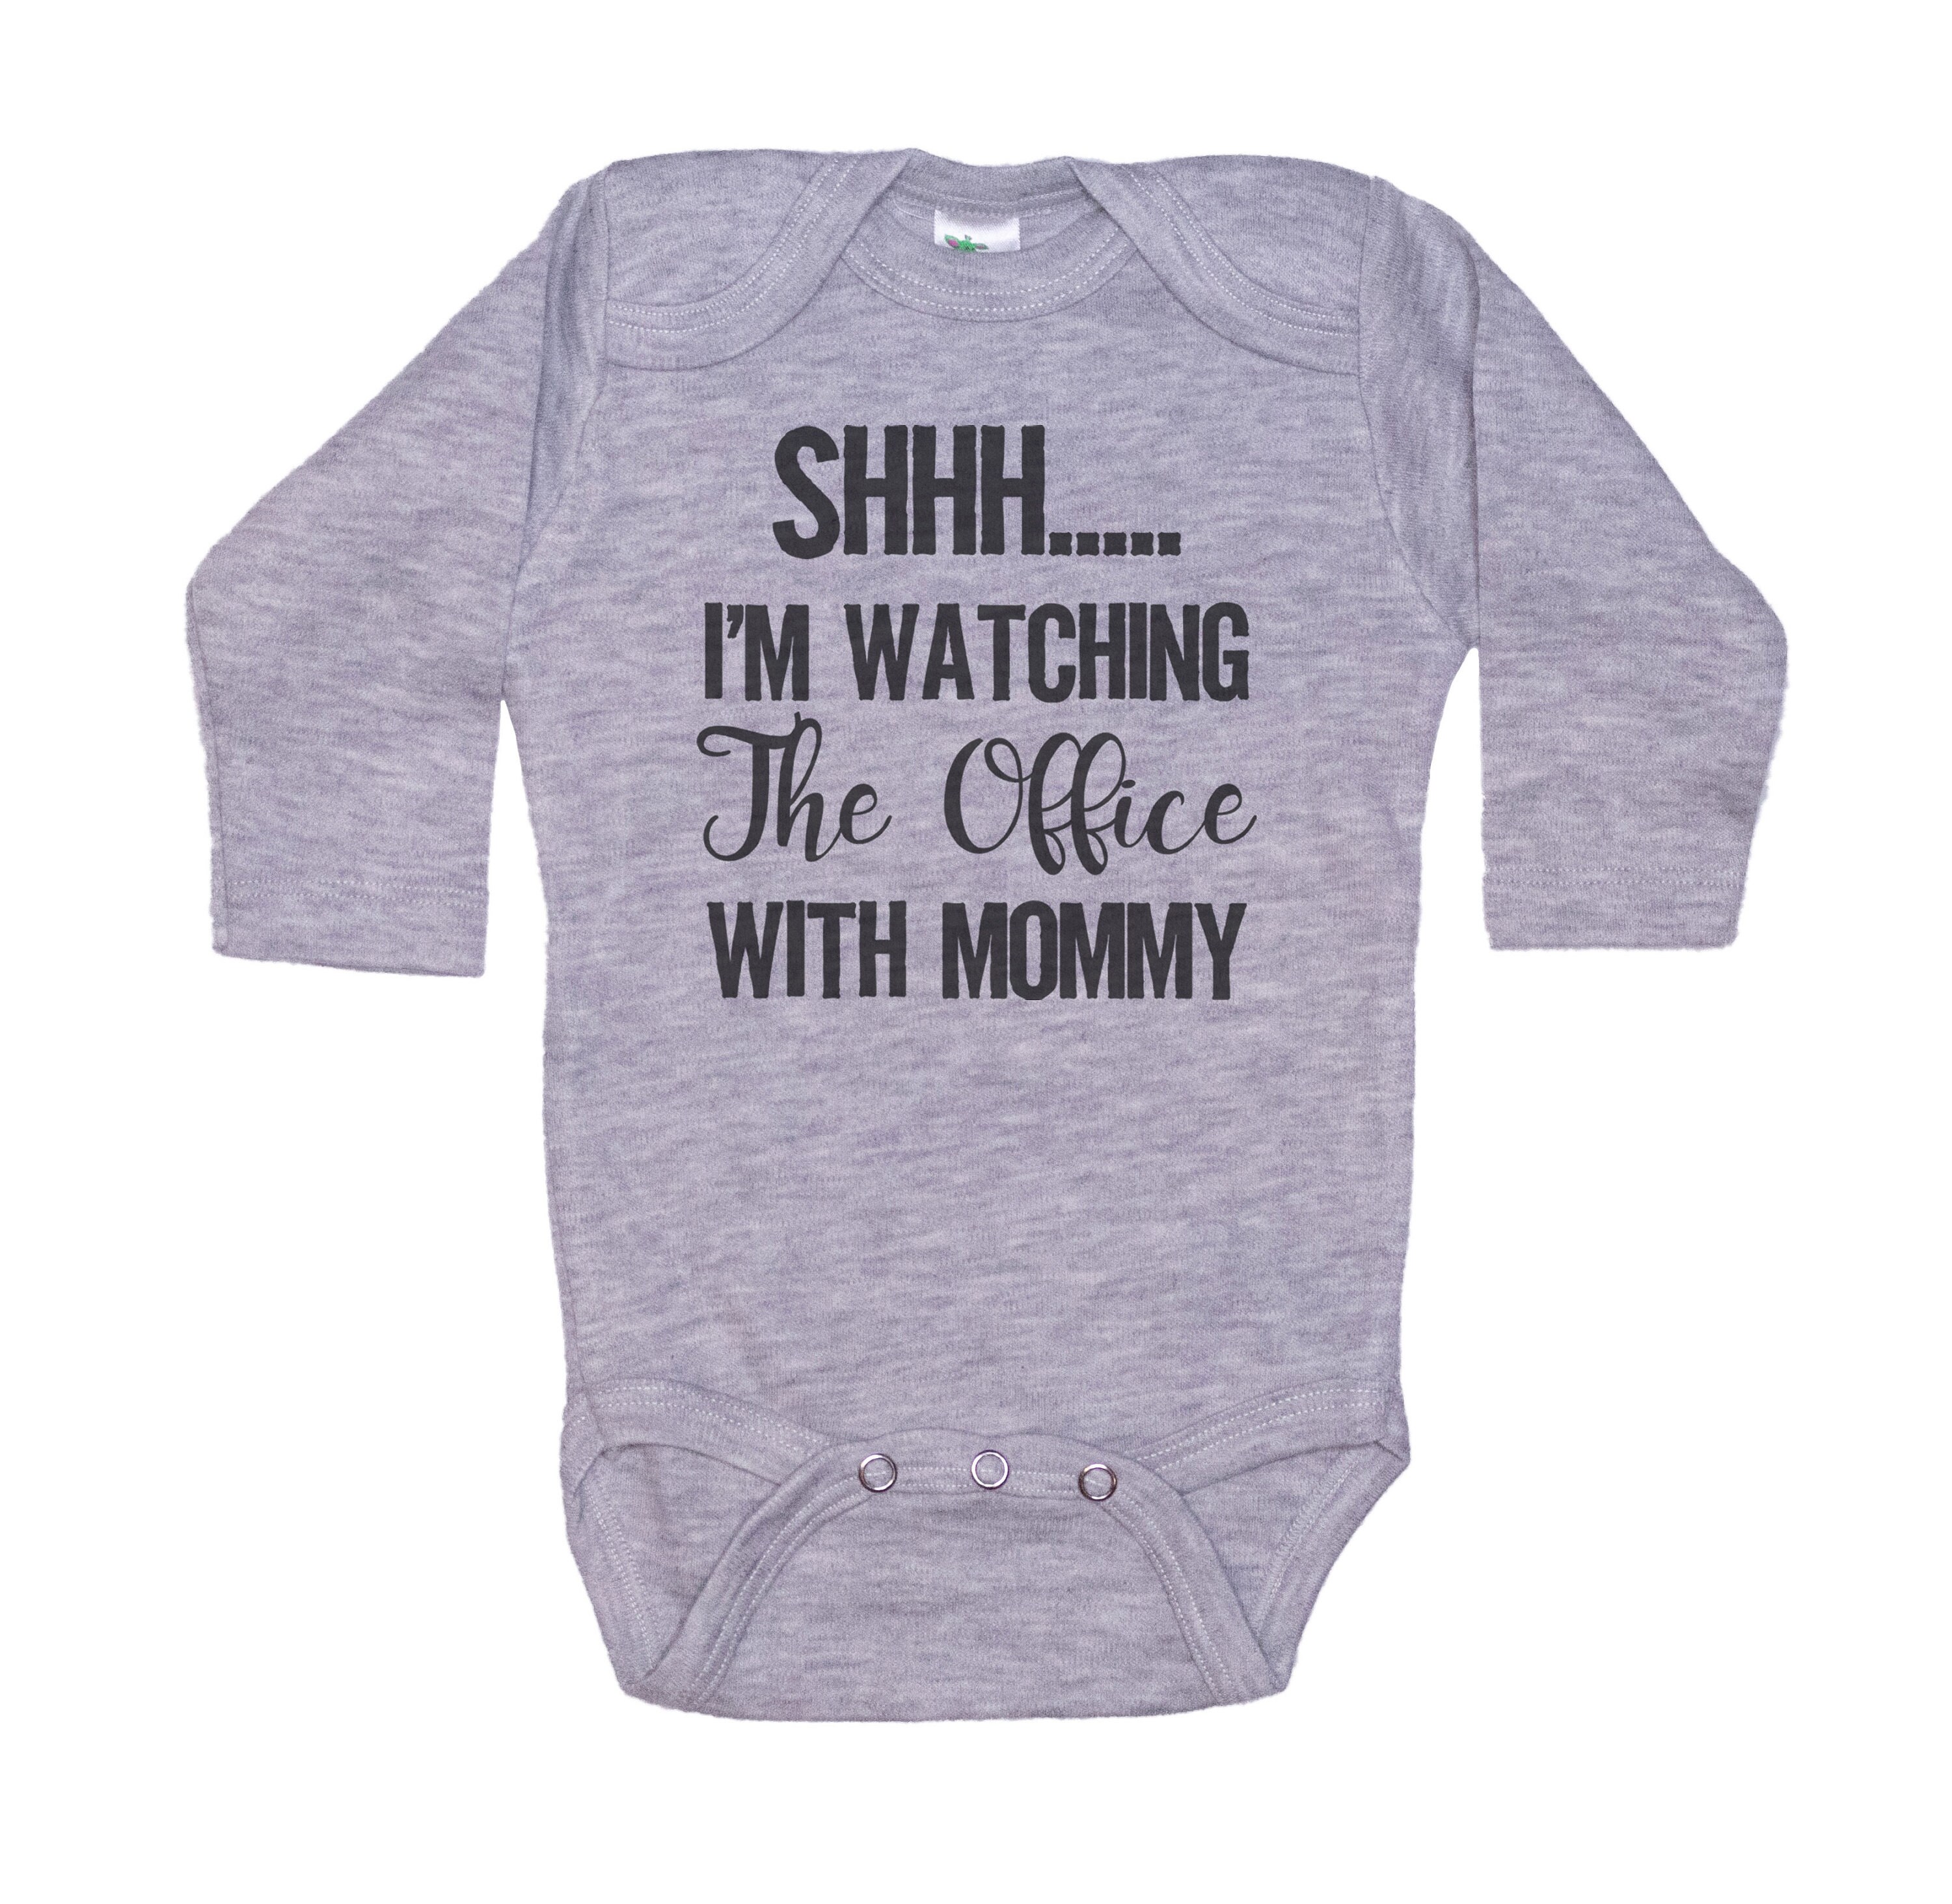 The Office Onesie Shh Im Watching the Office With Mommy photo image